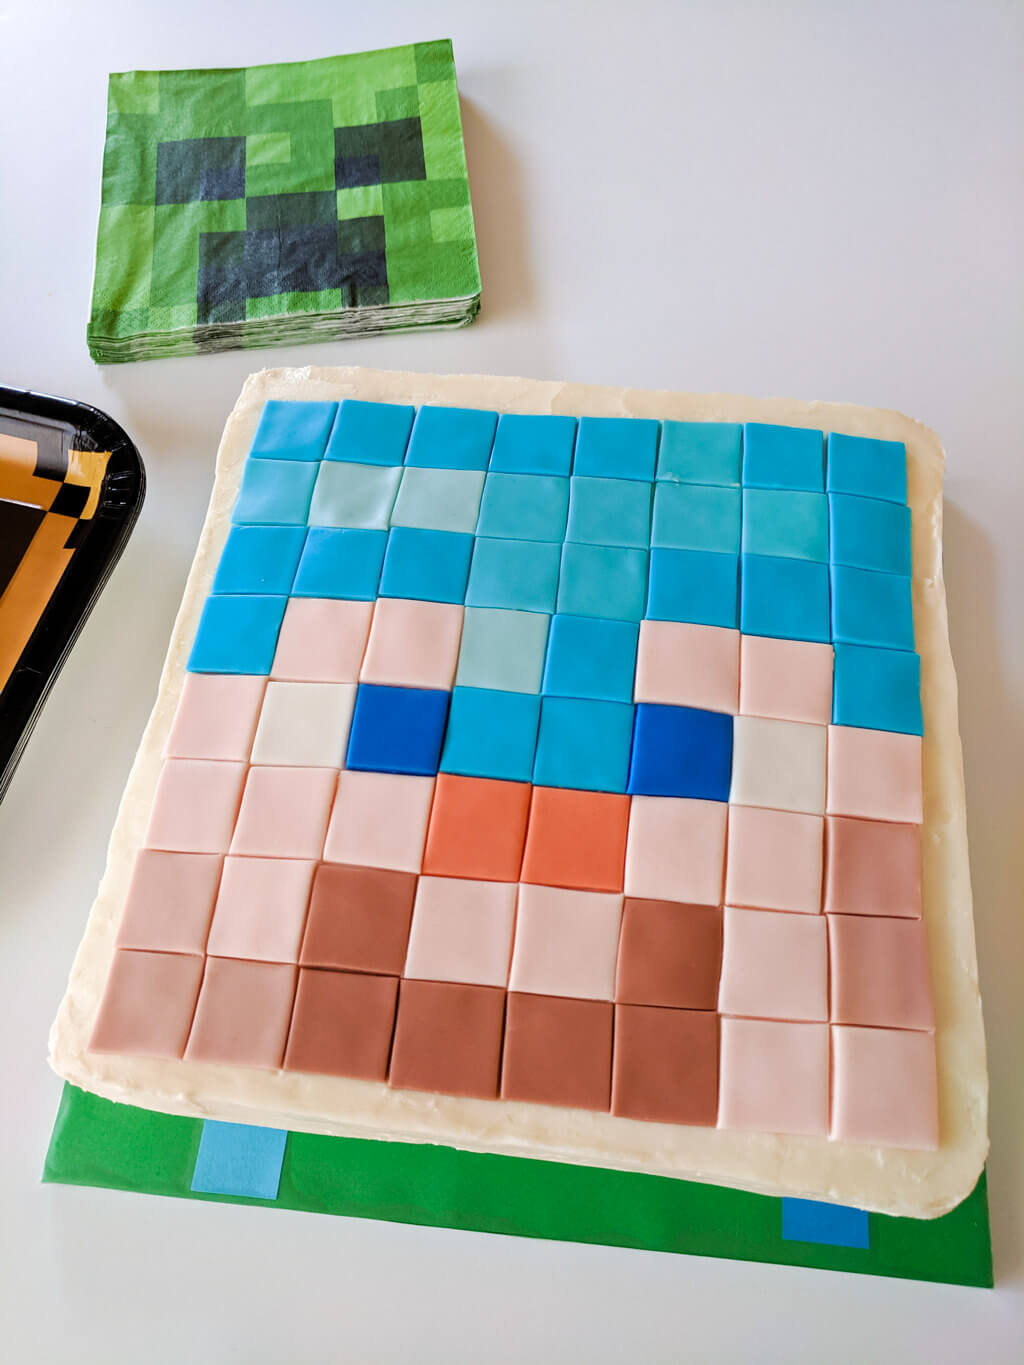 Tile, Round 2 x 2 with Bottom Stud Holder with Red Squares Pattern (Minecraft  Cake Frosting) : Part 14769pb295 | BrickLink